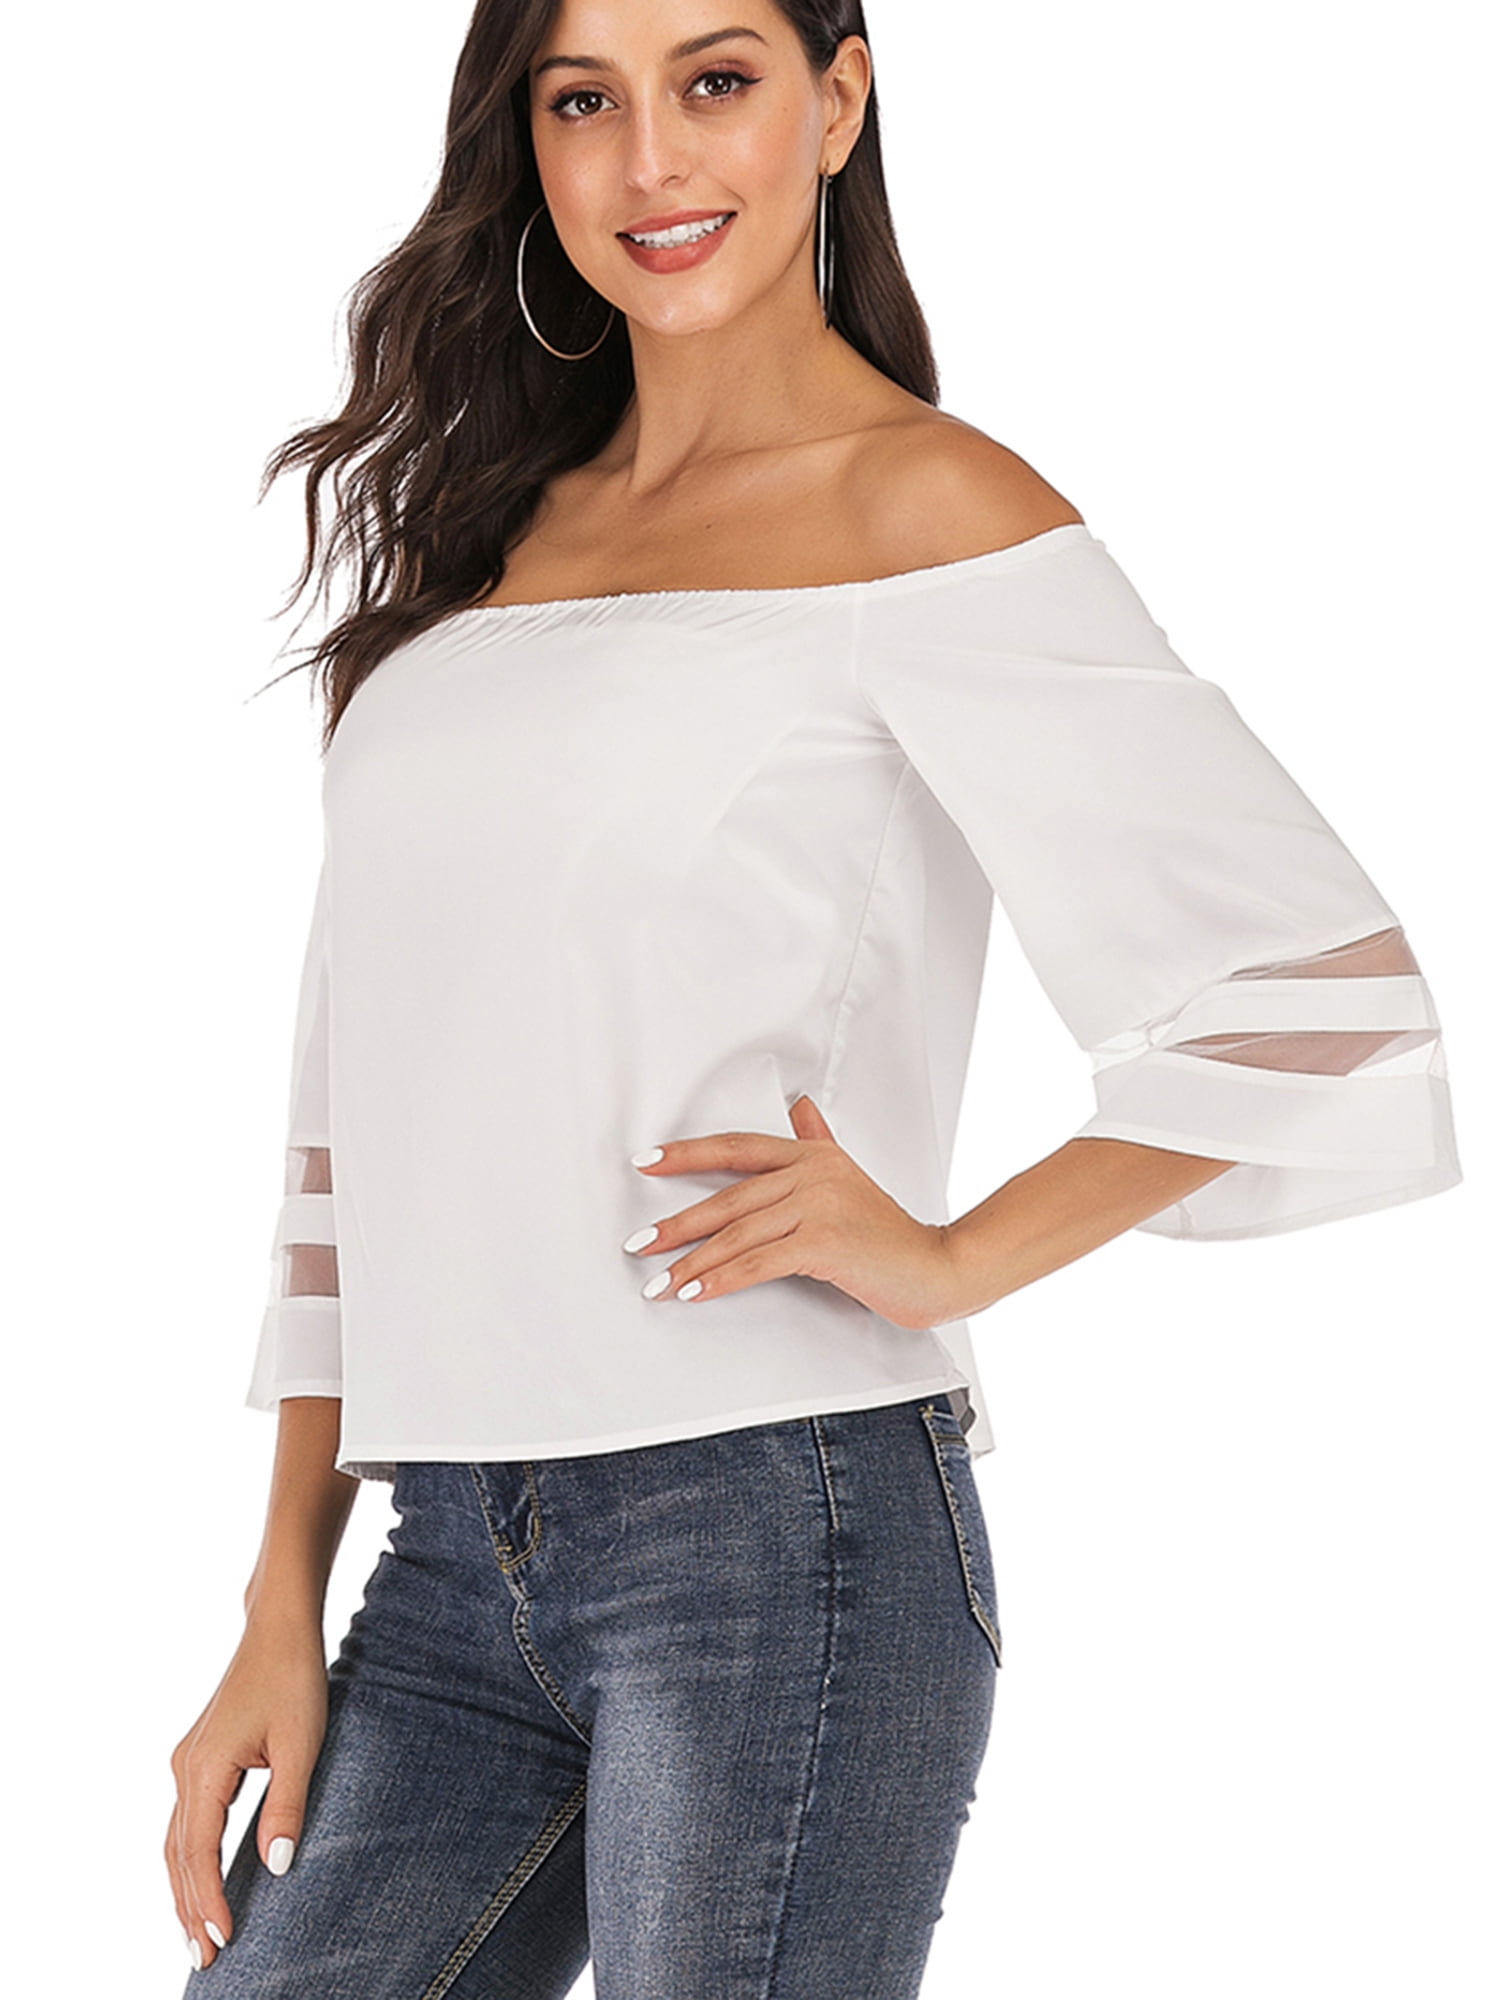 SHOPESSA Tie Front Shirts for Women Plus Size Strapless 3/4 Sleeve Tees Blouse Loose Off Shoulder Tops for Women 